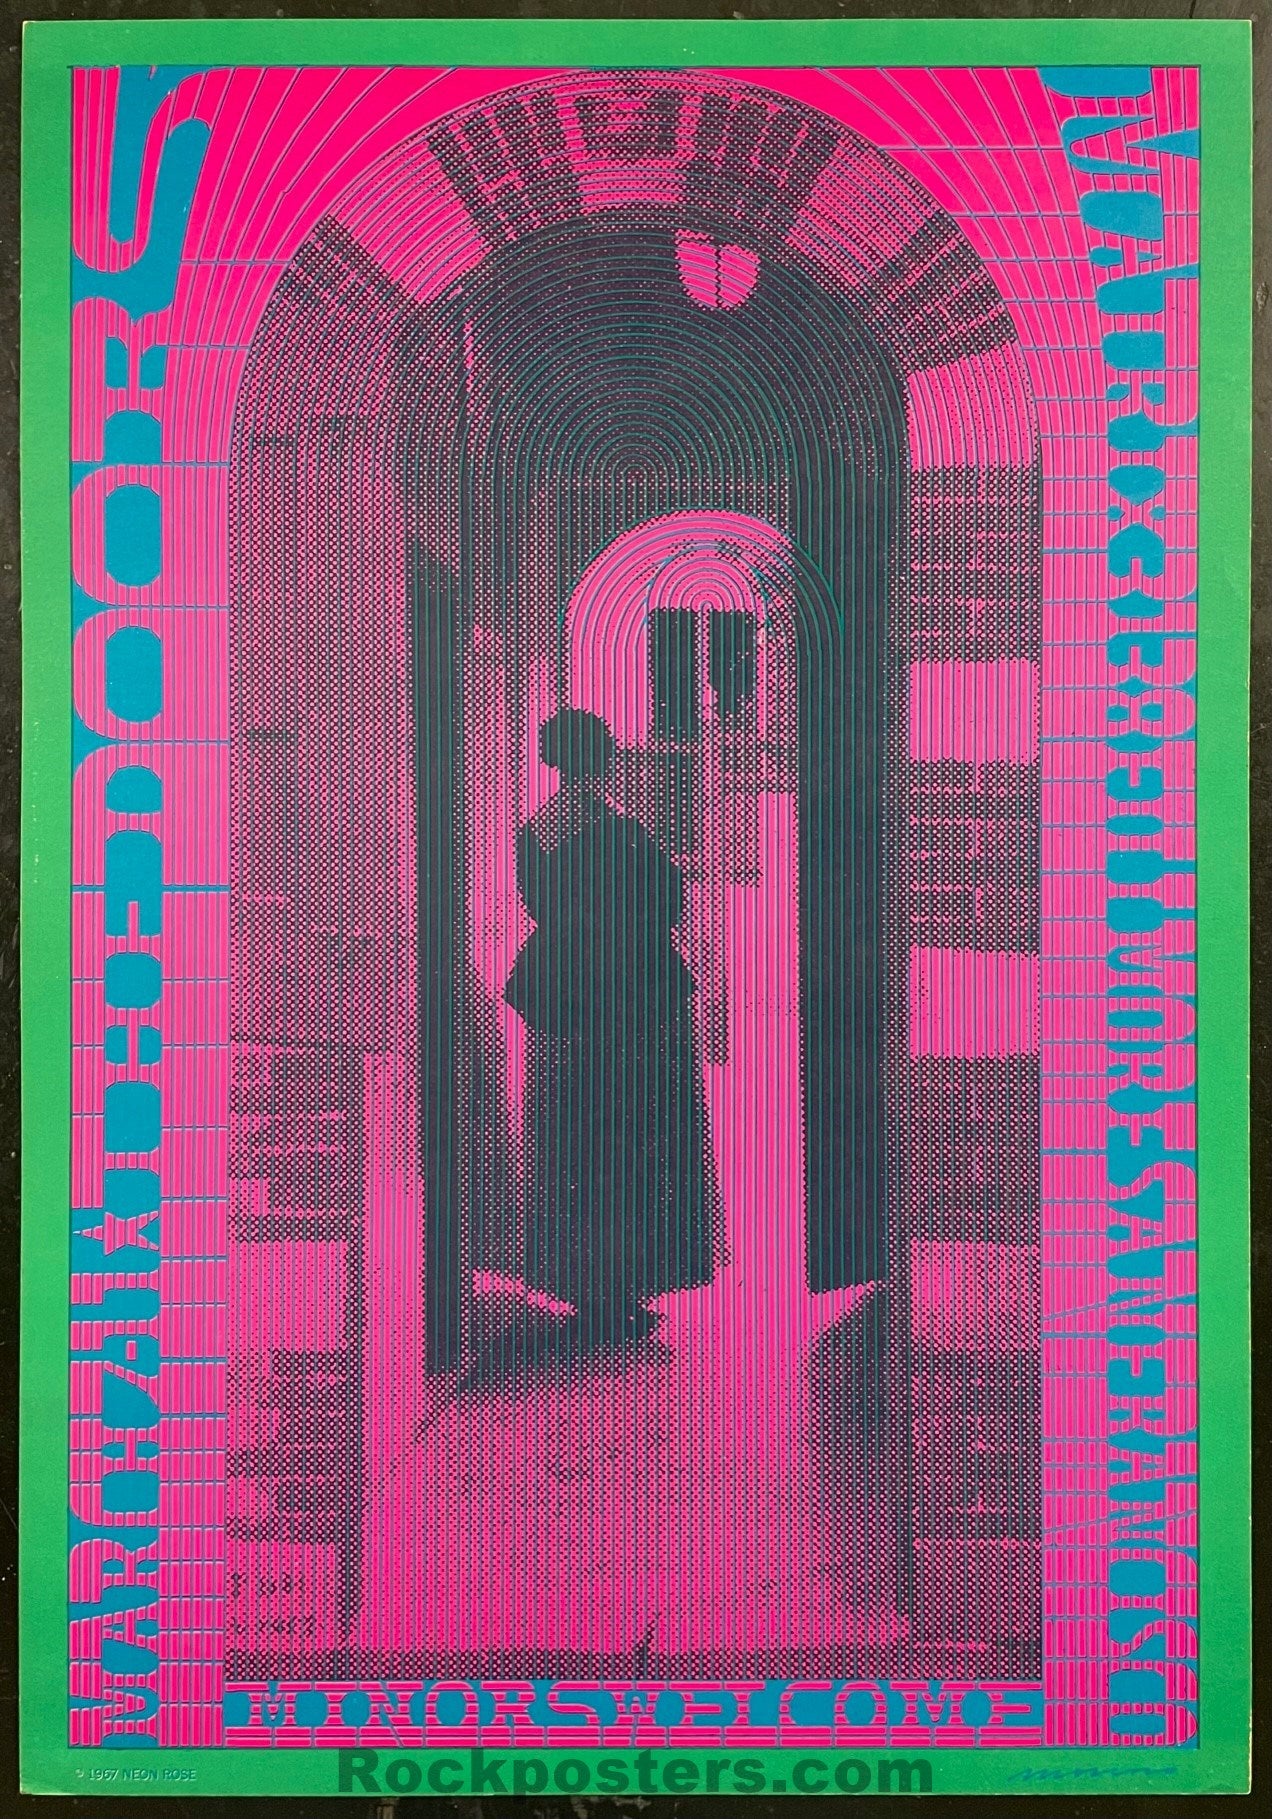 AUCTION - Neon Rose 10 - The Doors - Victor Moscoso - 1967 Poster - The Matrix - Near Mint Minus